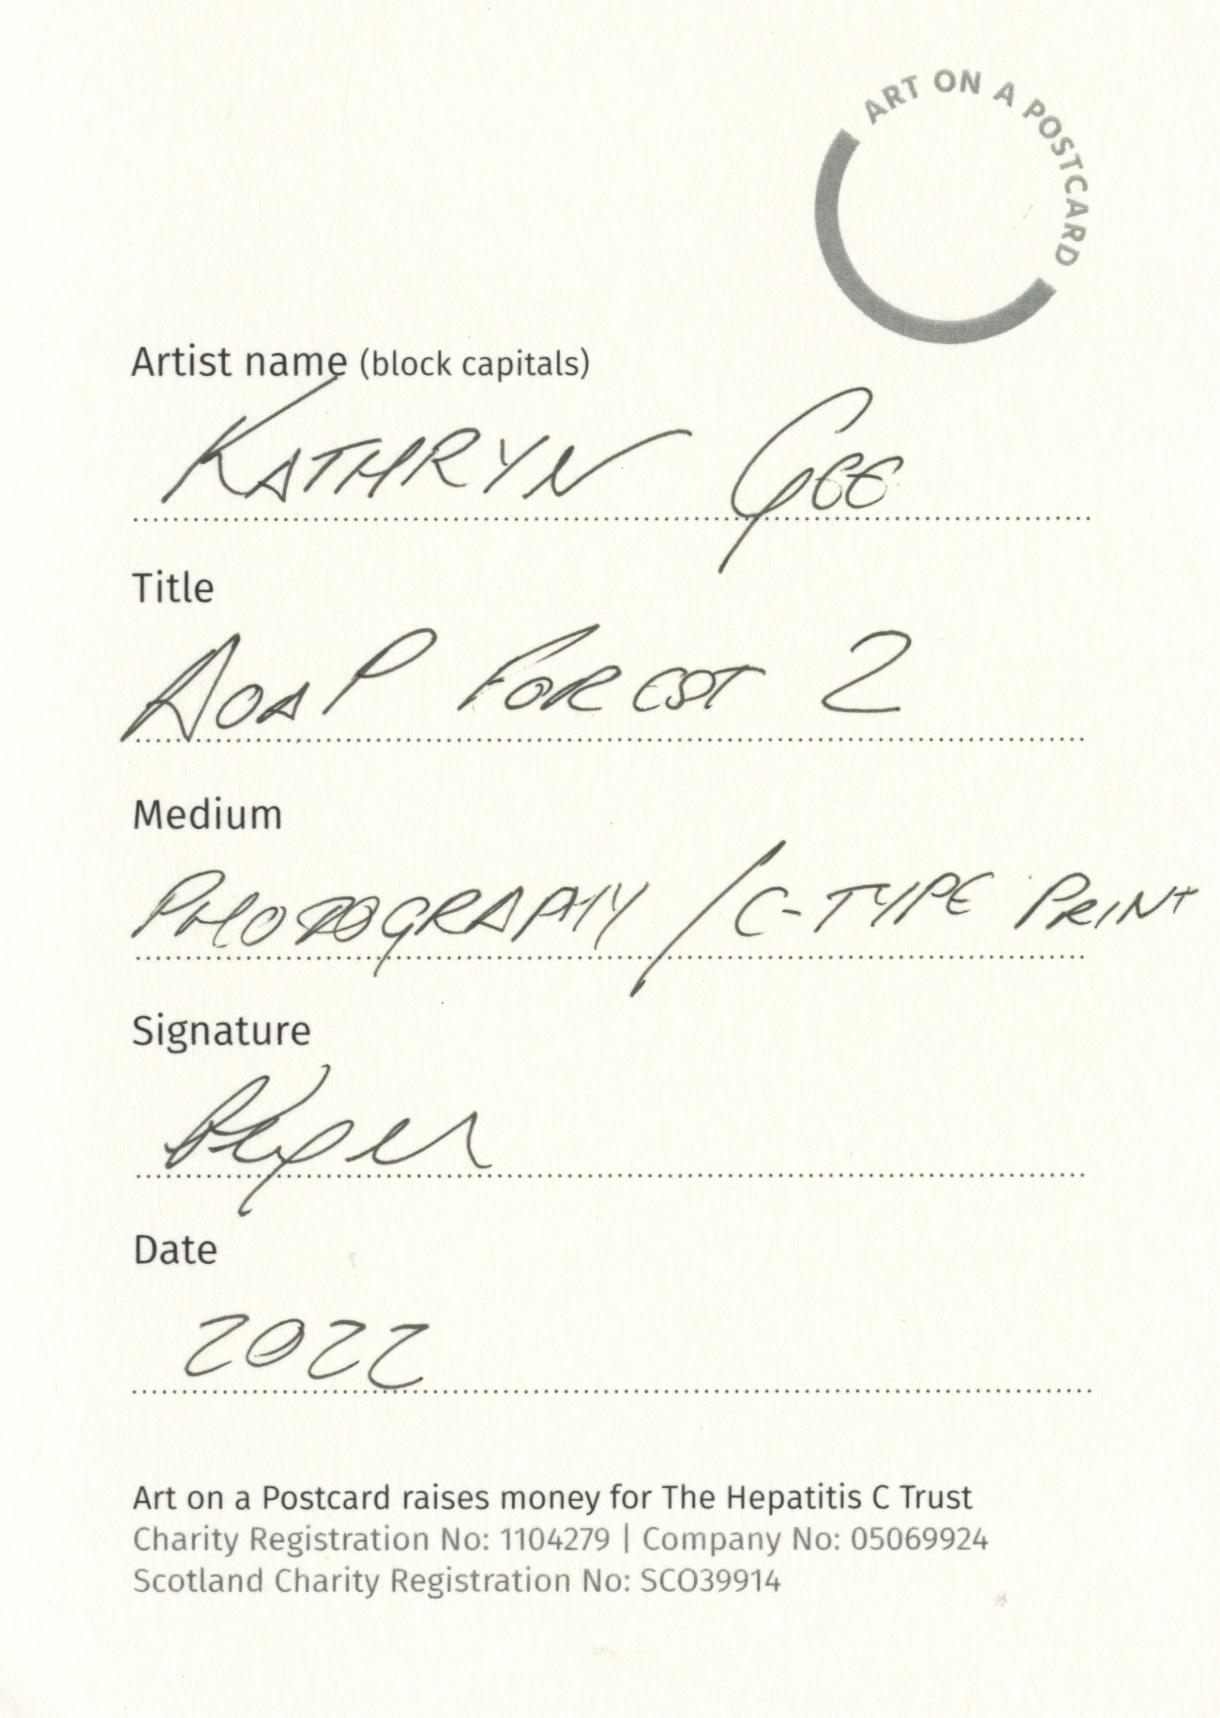 4. Kathryn Gee - AoaP Forest 2 - BACK